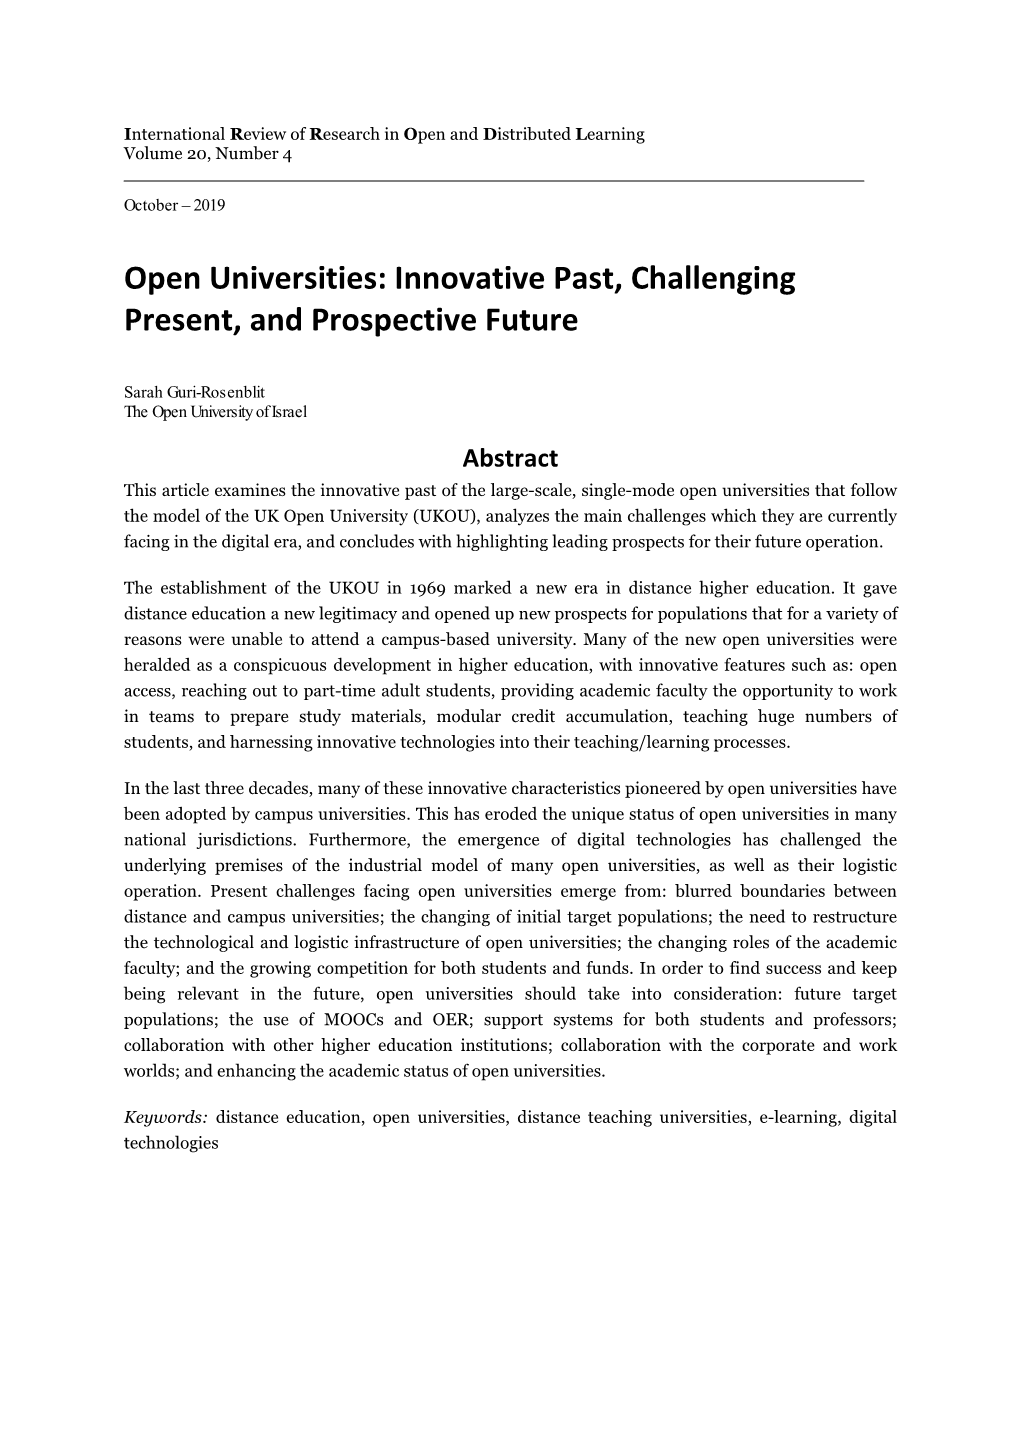 Open Universities: Innovative Past, Challenging Present, and Prospective Future